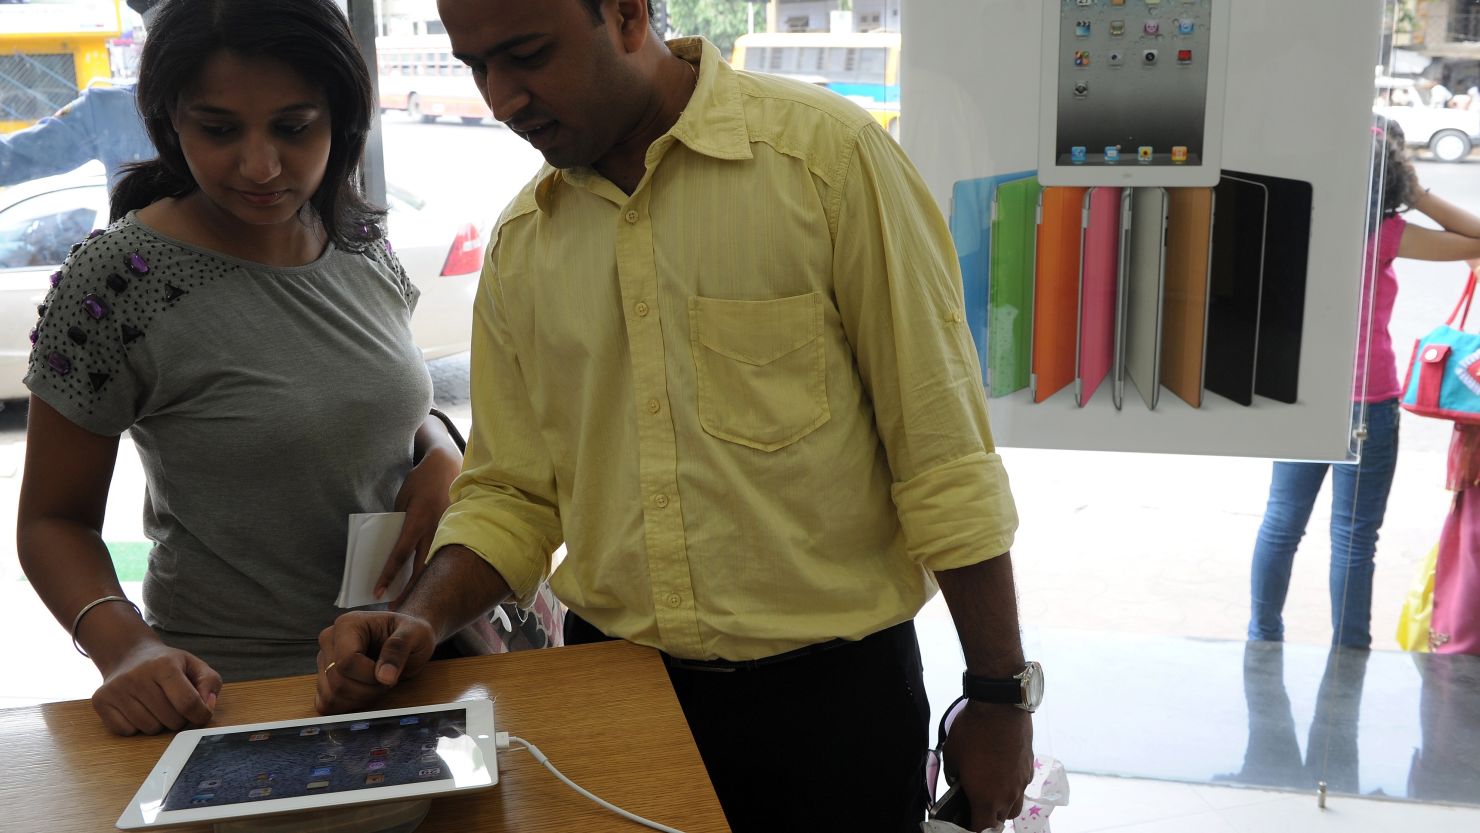 A couple in Mumbai, India, checks out the iPad 2 at an Apple reseller in 2011.